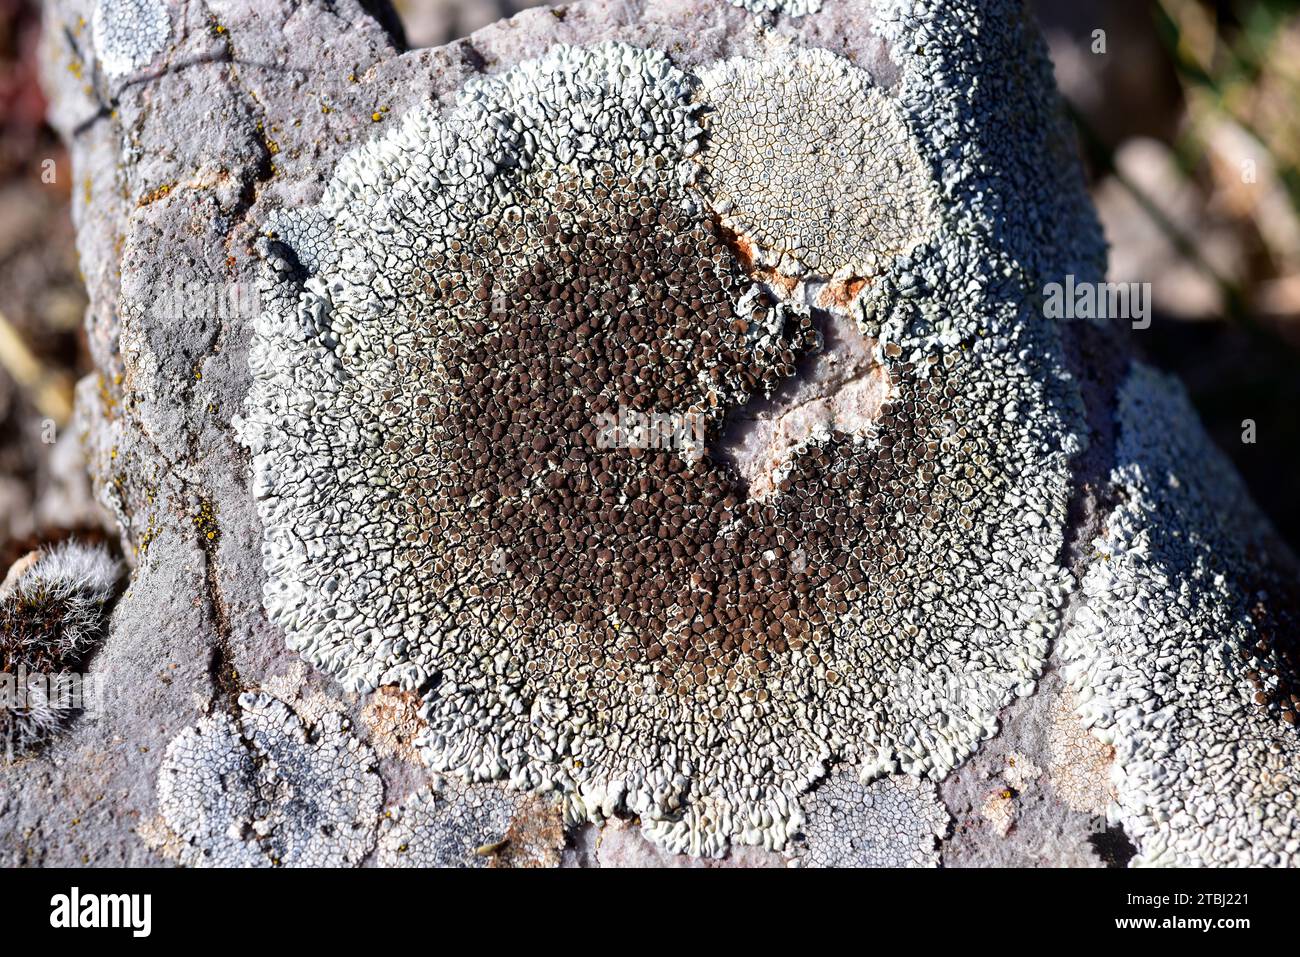 Lecanora muralis or Protoparmeliopsis muralis is a crustose lichen that grows on calcareous or siliceous rocks. Up to the right another crustose liche Stock Photo